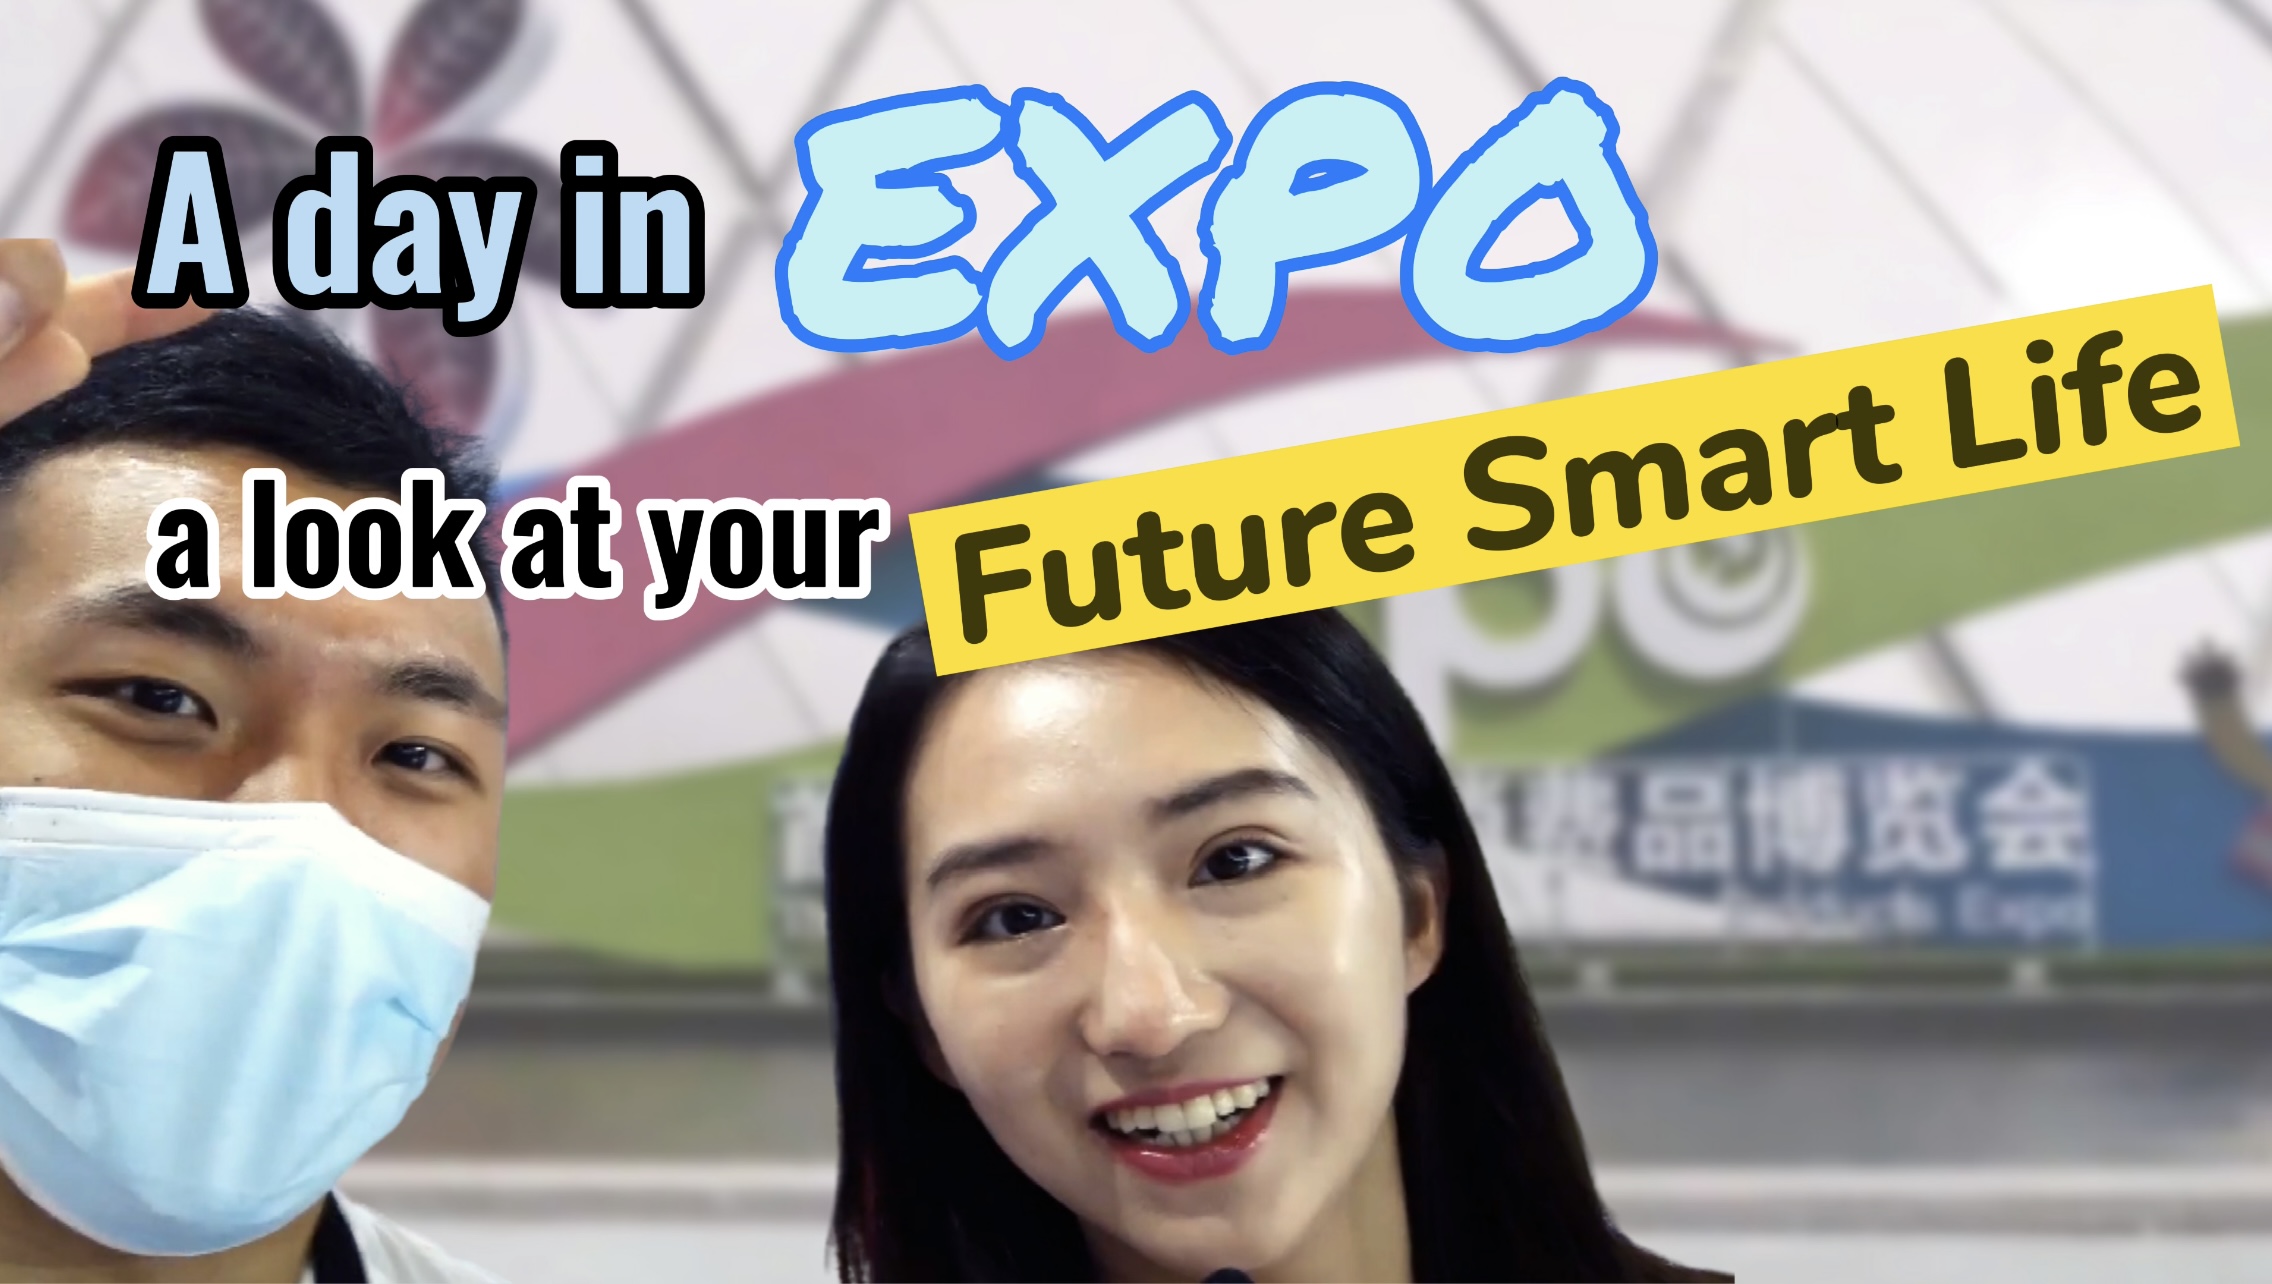 GLOBALink | EXPOpportunity: A day in EXPO - a look at your future smart life